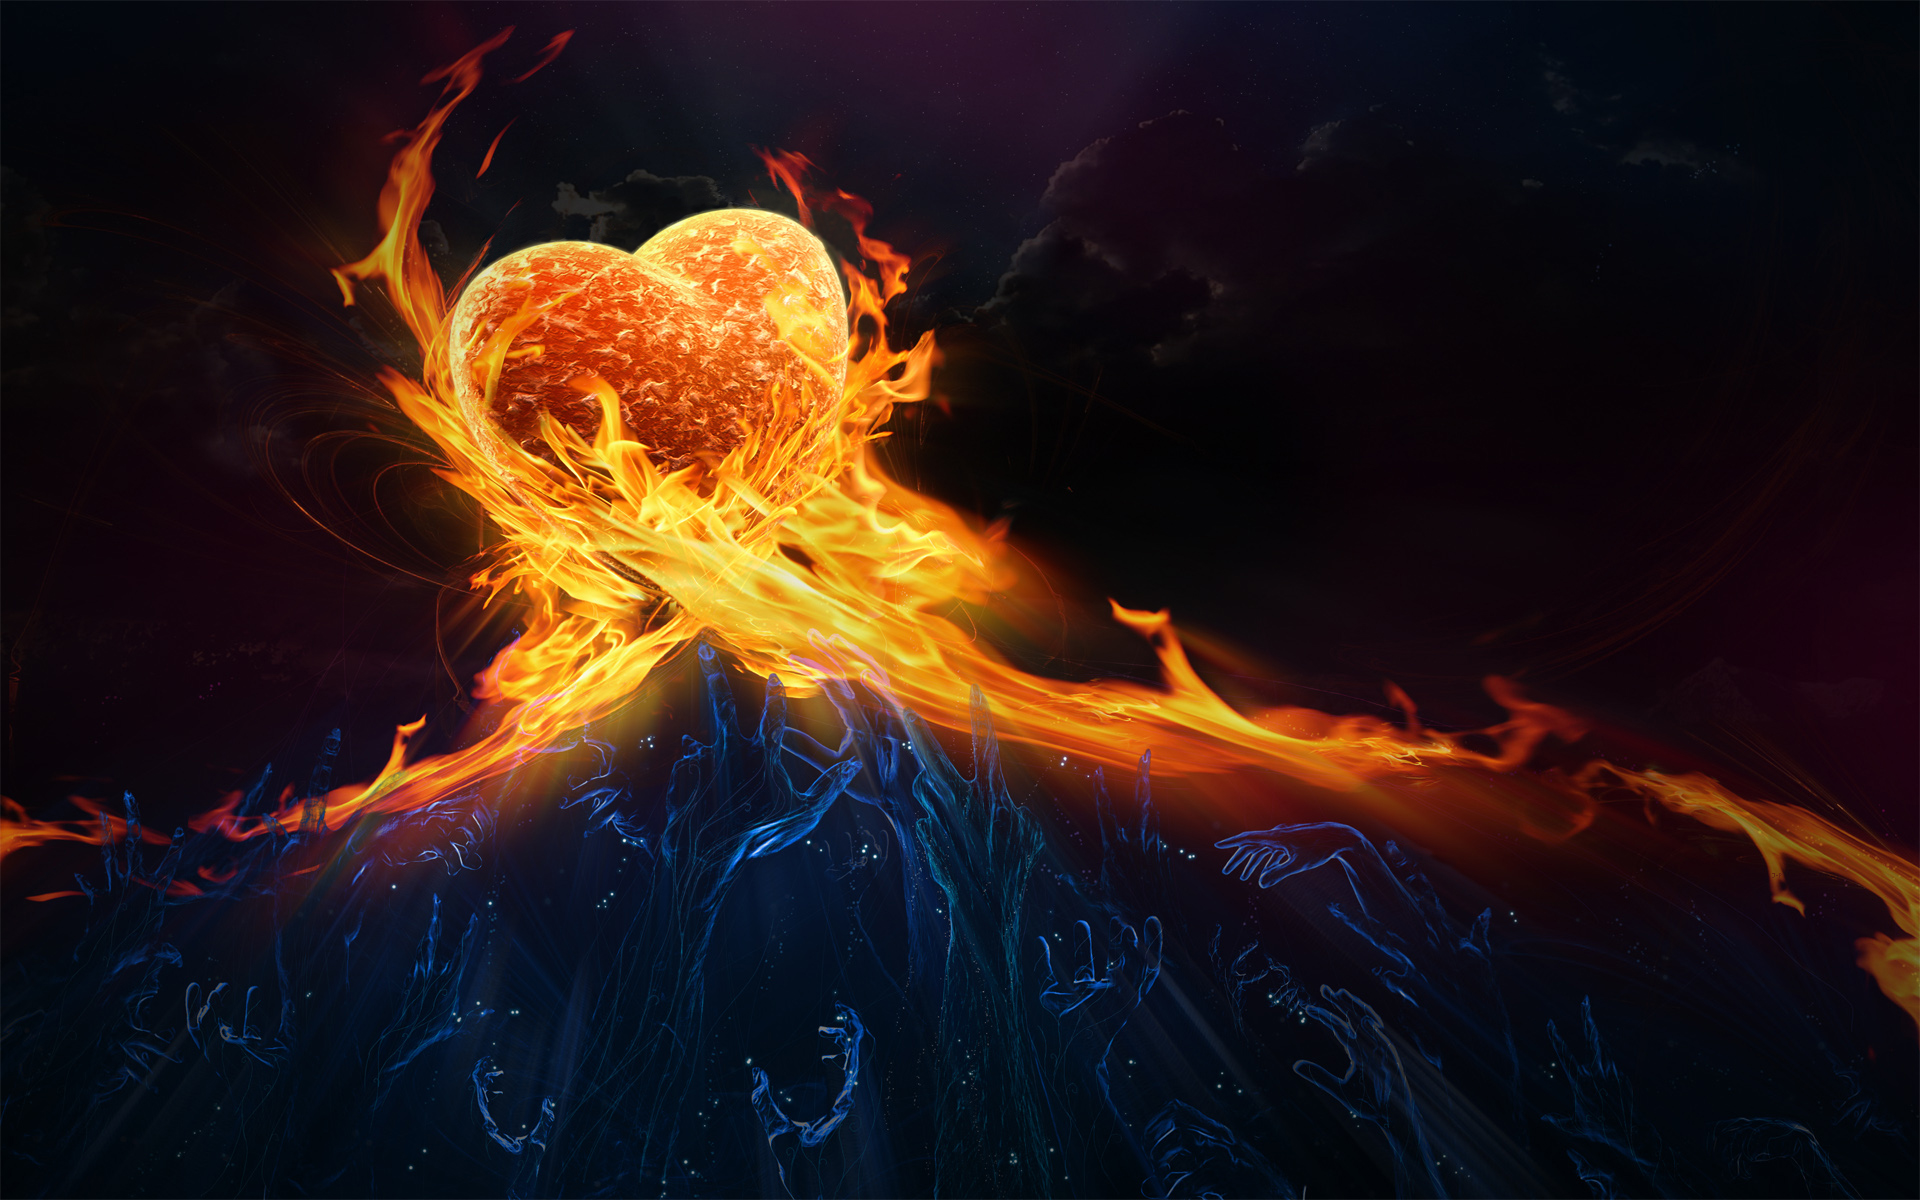 love, Romance, Hate, Fire, Flames, Ice, Mood, Emotion, Cold, Hot, Ying, Yang, Heart, 3d, Cg, Digital, Color, Artistic, Mood, Emotion, Psychedelic Wallpaper